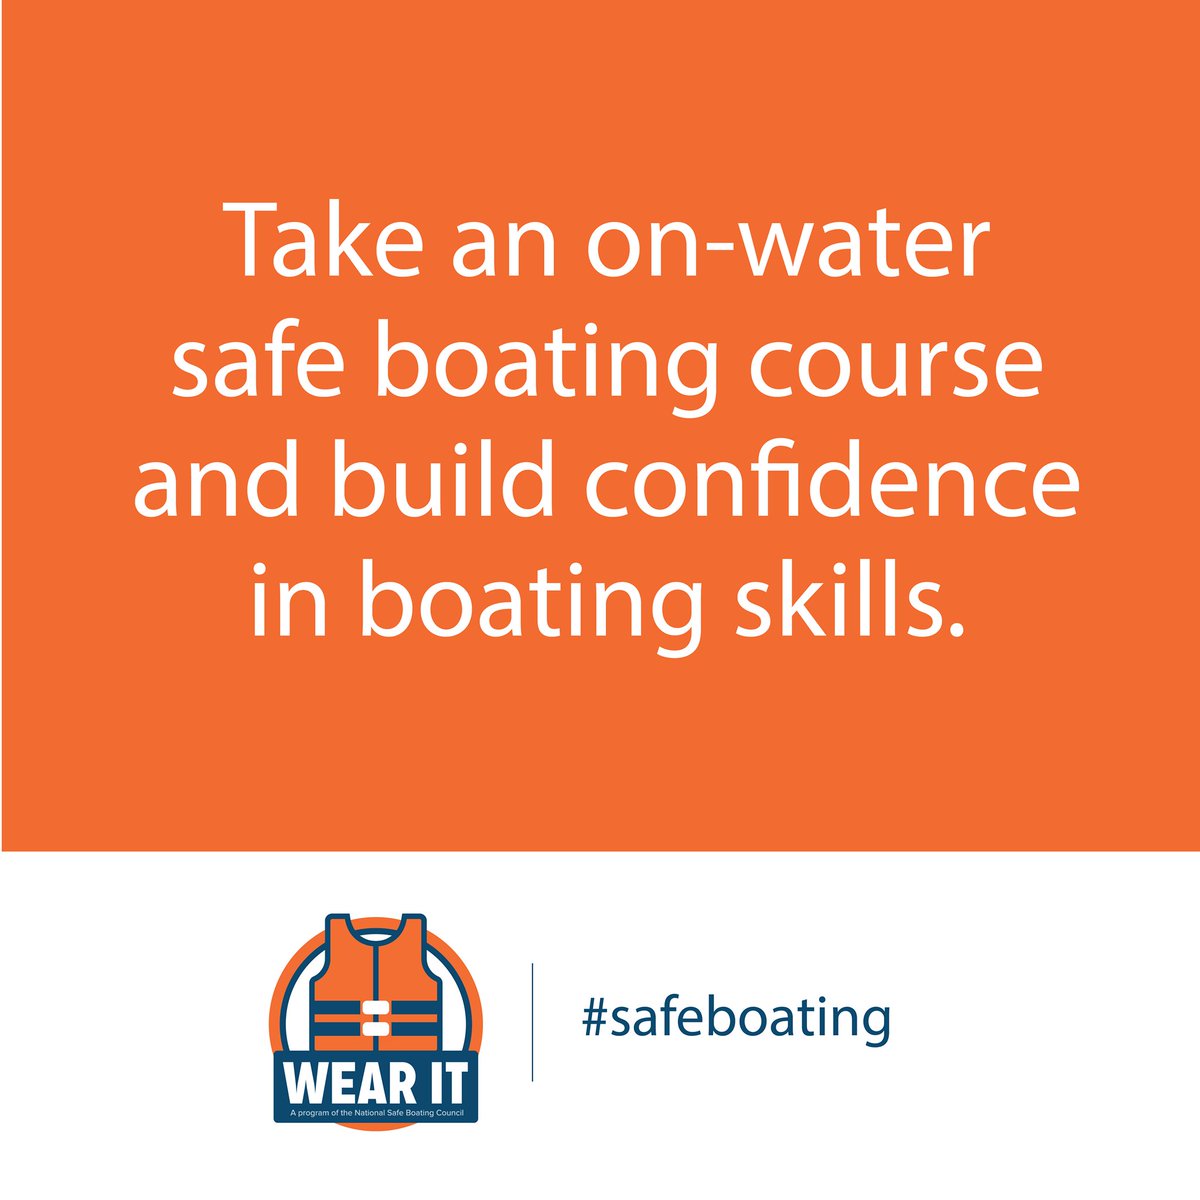 RT @BoatingCampaign: #tuesdaytip Take a boating safety course. As a boat owner or operator, you are responsible for your safety and the safety of your passengers. Safety starts with YOU! @BoatUSFdn @kalkomey #safeboating #boatingtips